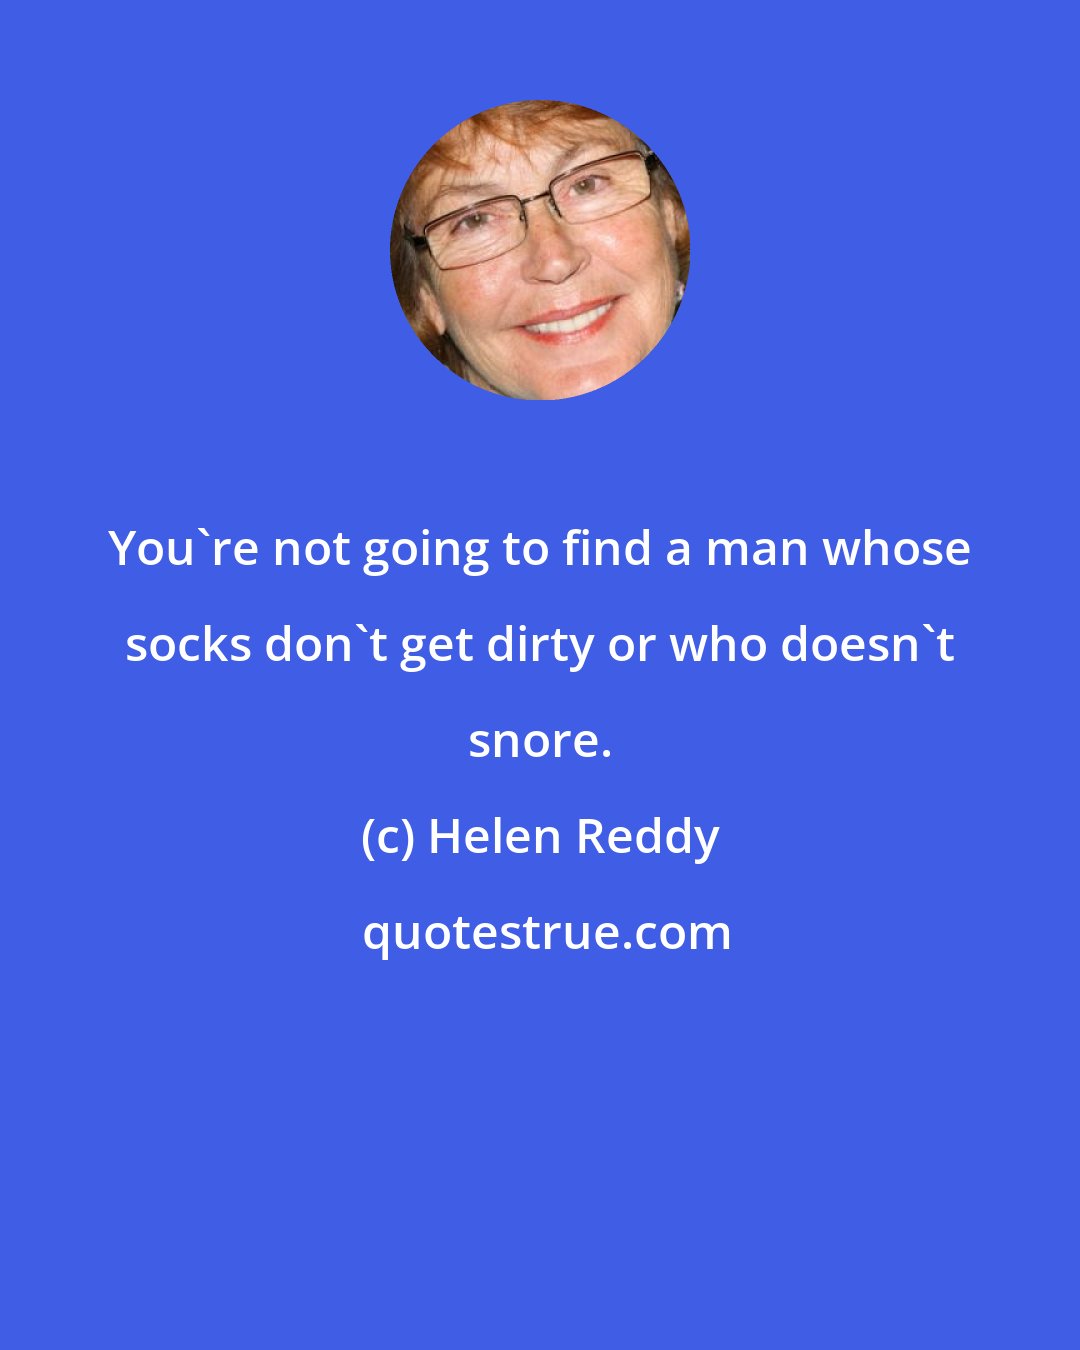 Helen Reddy: You're not going to find a man whose socks don't get dirty or who doesn't snore.